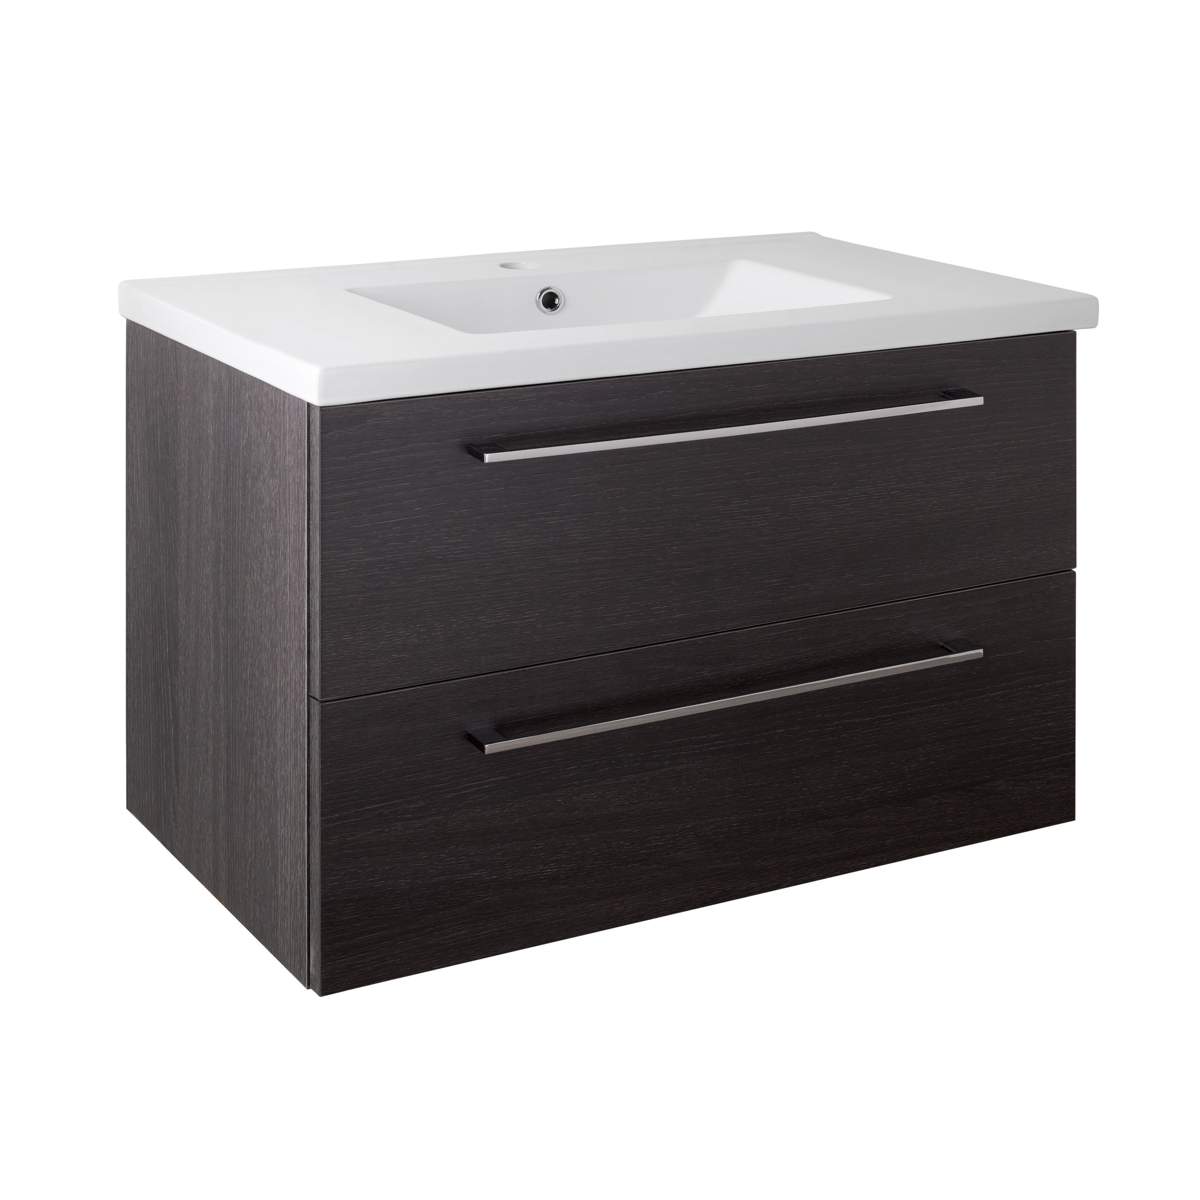 JTP Pace Units 800mm Wall Mounted Unit with Drawers and Basin in Black (PWM803BK + P800BS)